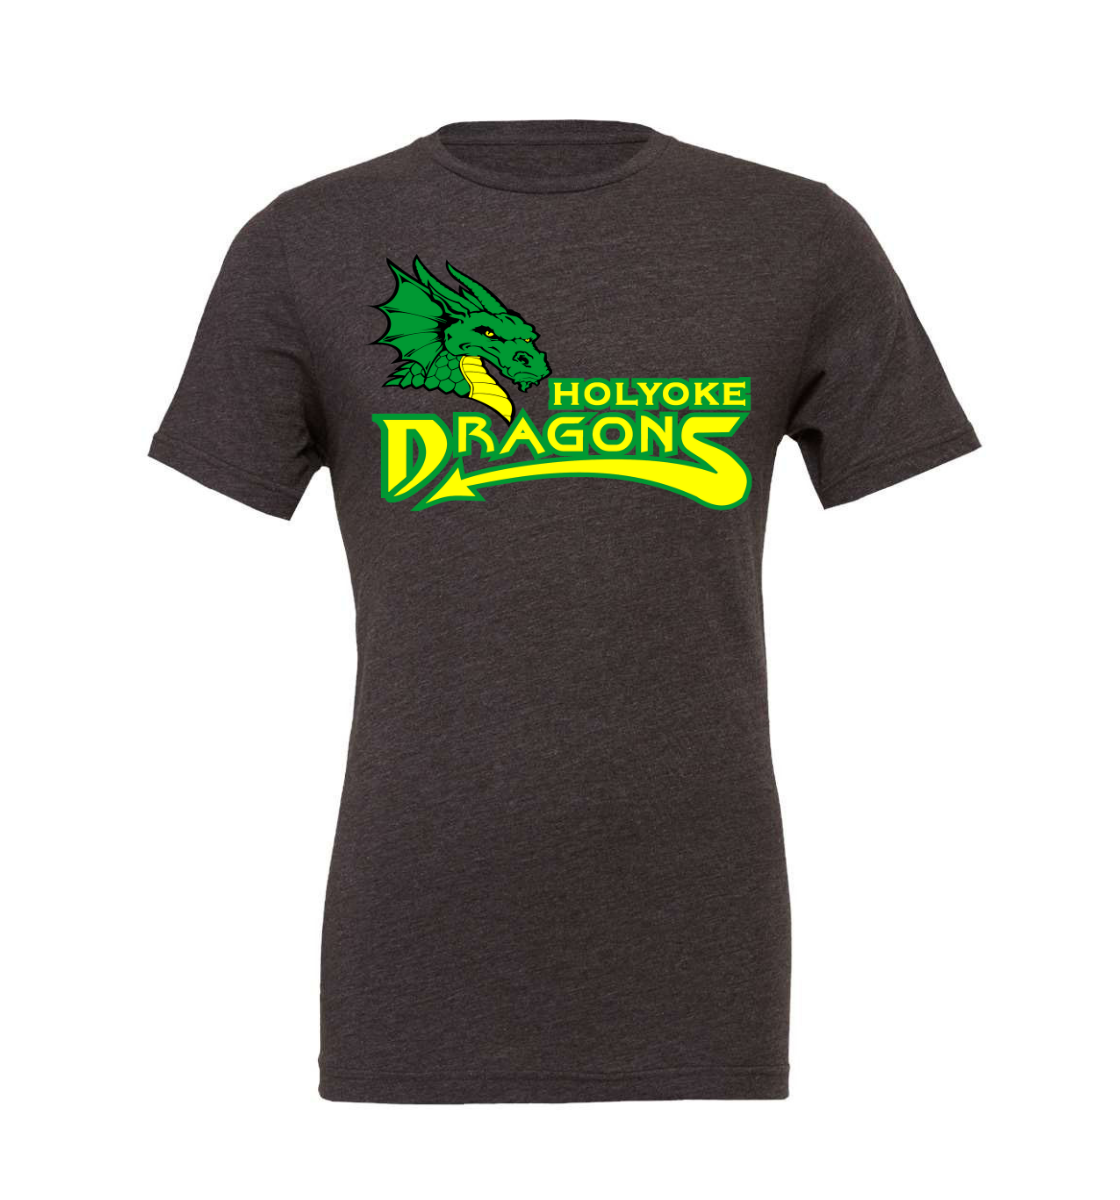 holyoke dragons t-shirt: for dragons fans only!